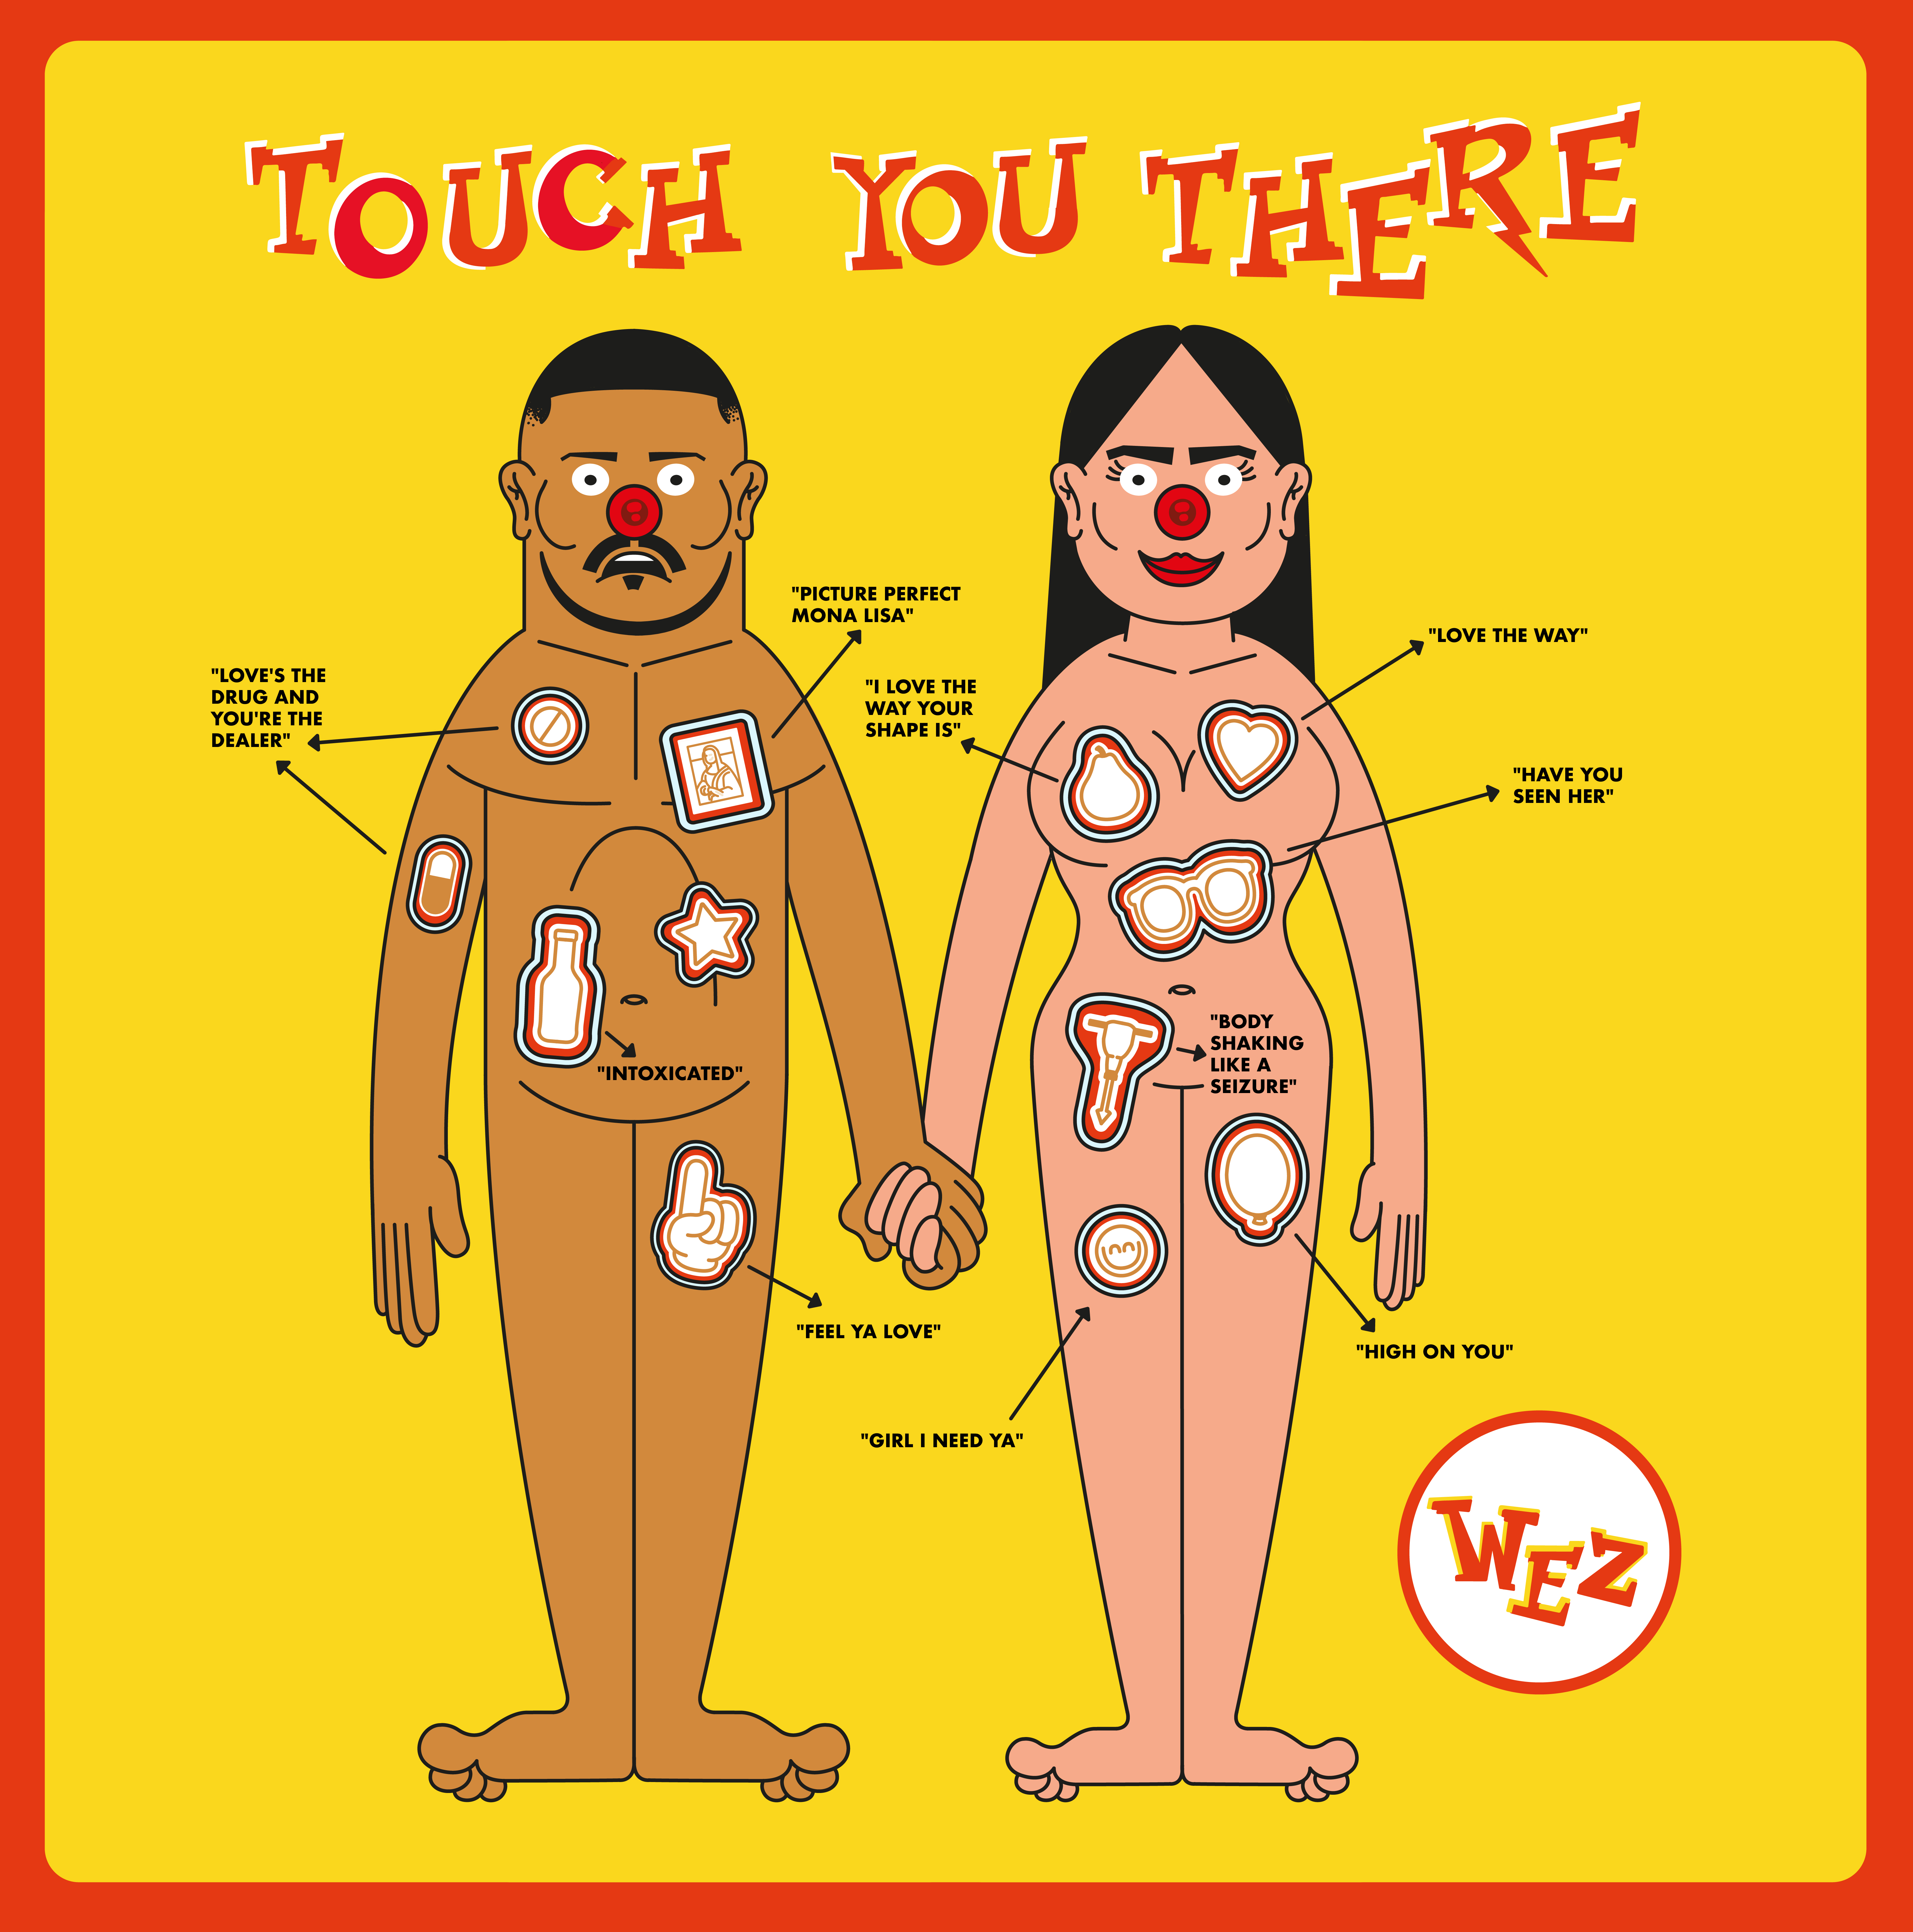 wez_-_touch_you_there_-_commercial_artwork.jpg